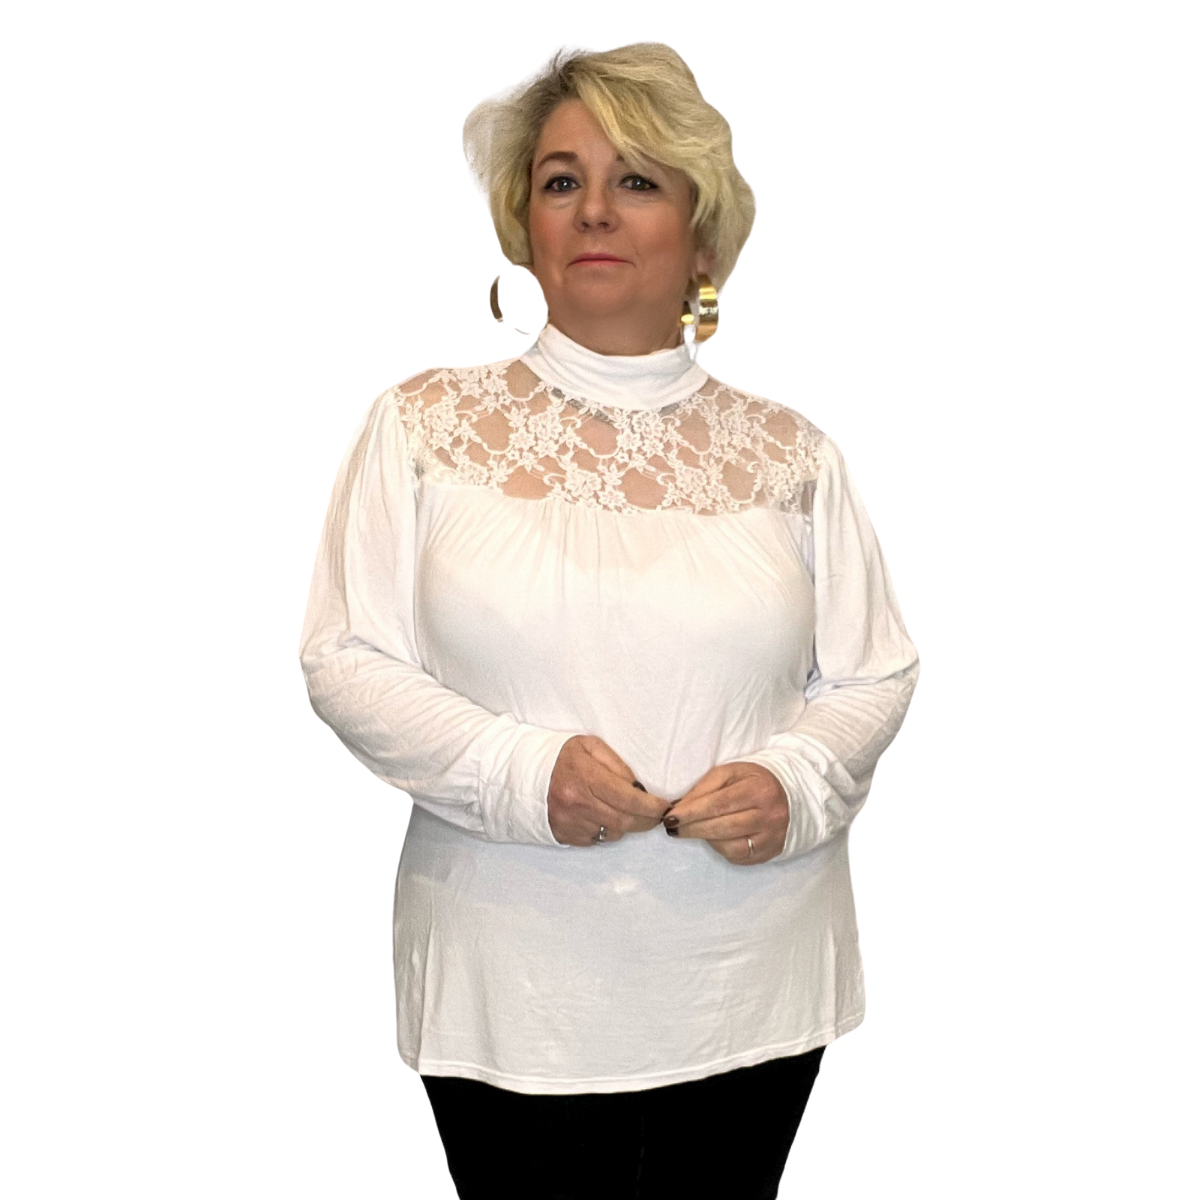 POLO NECK LACE NECK LINE LONG SEEVE TOP